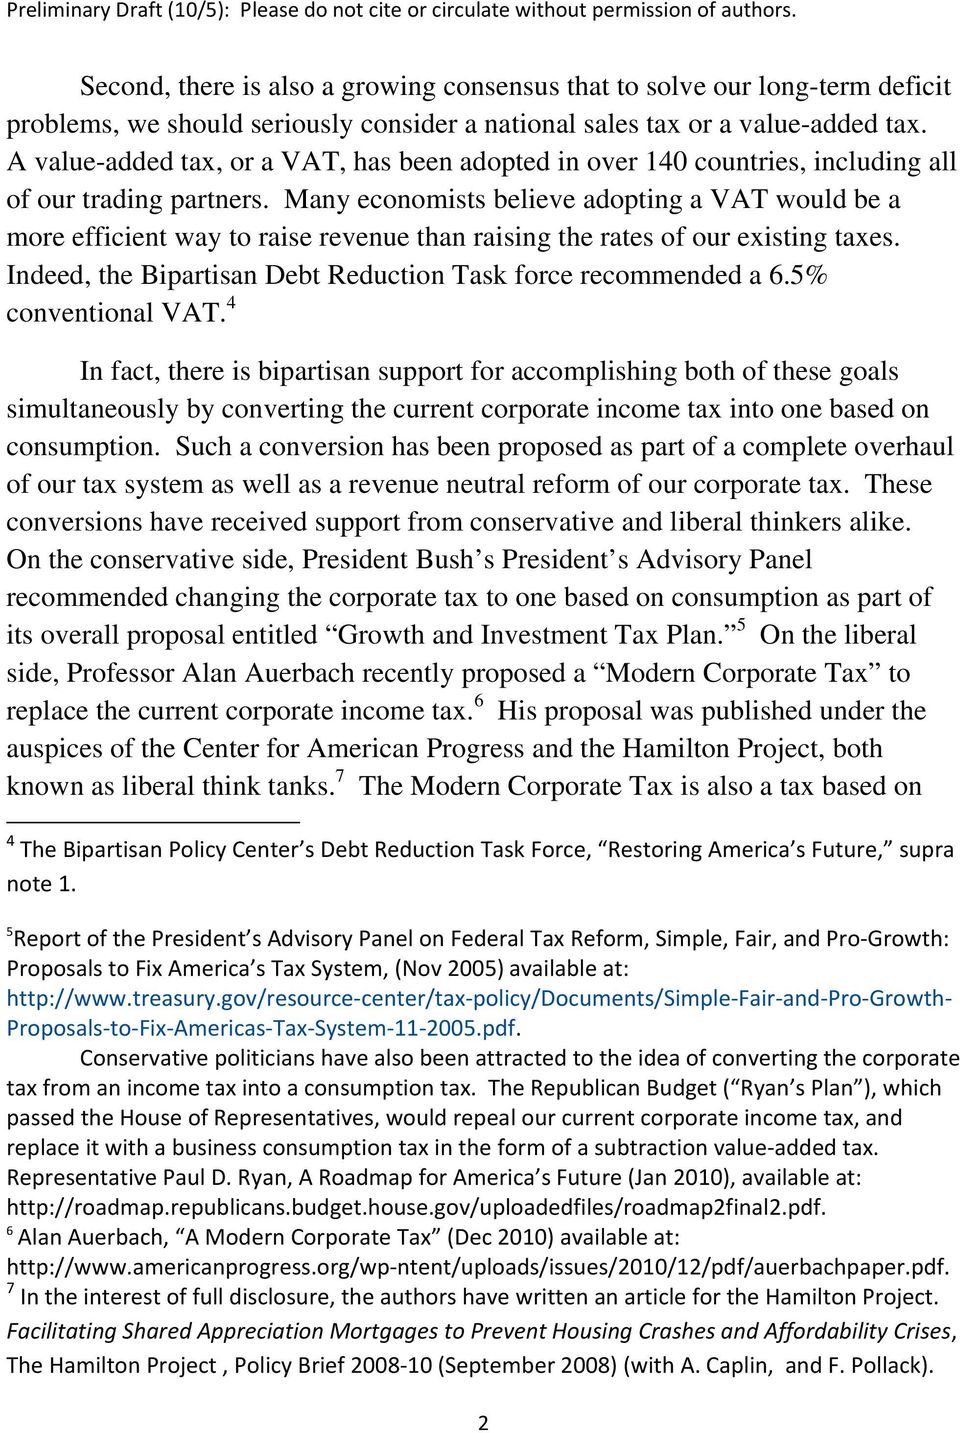 Many economists believe adopting a VAT would be a more efficient way to raise revenue than raising the rates of our existing taxes. Indeed, the Bipartisan Debt Reduction Task force recommended a 6.